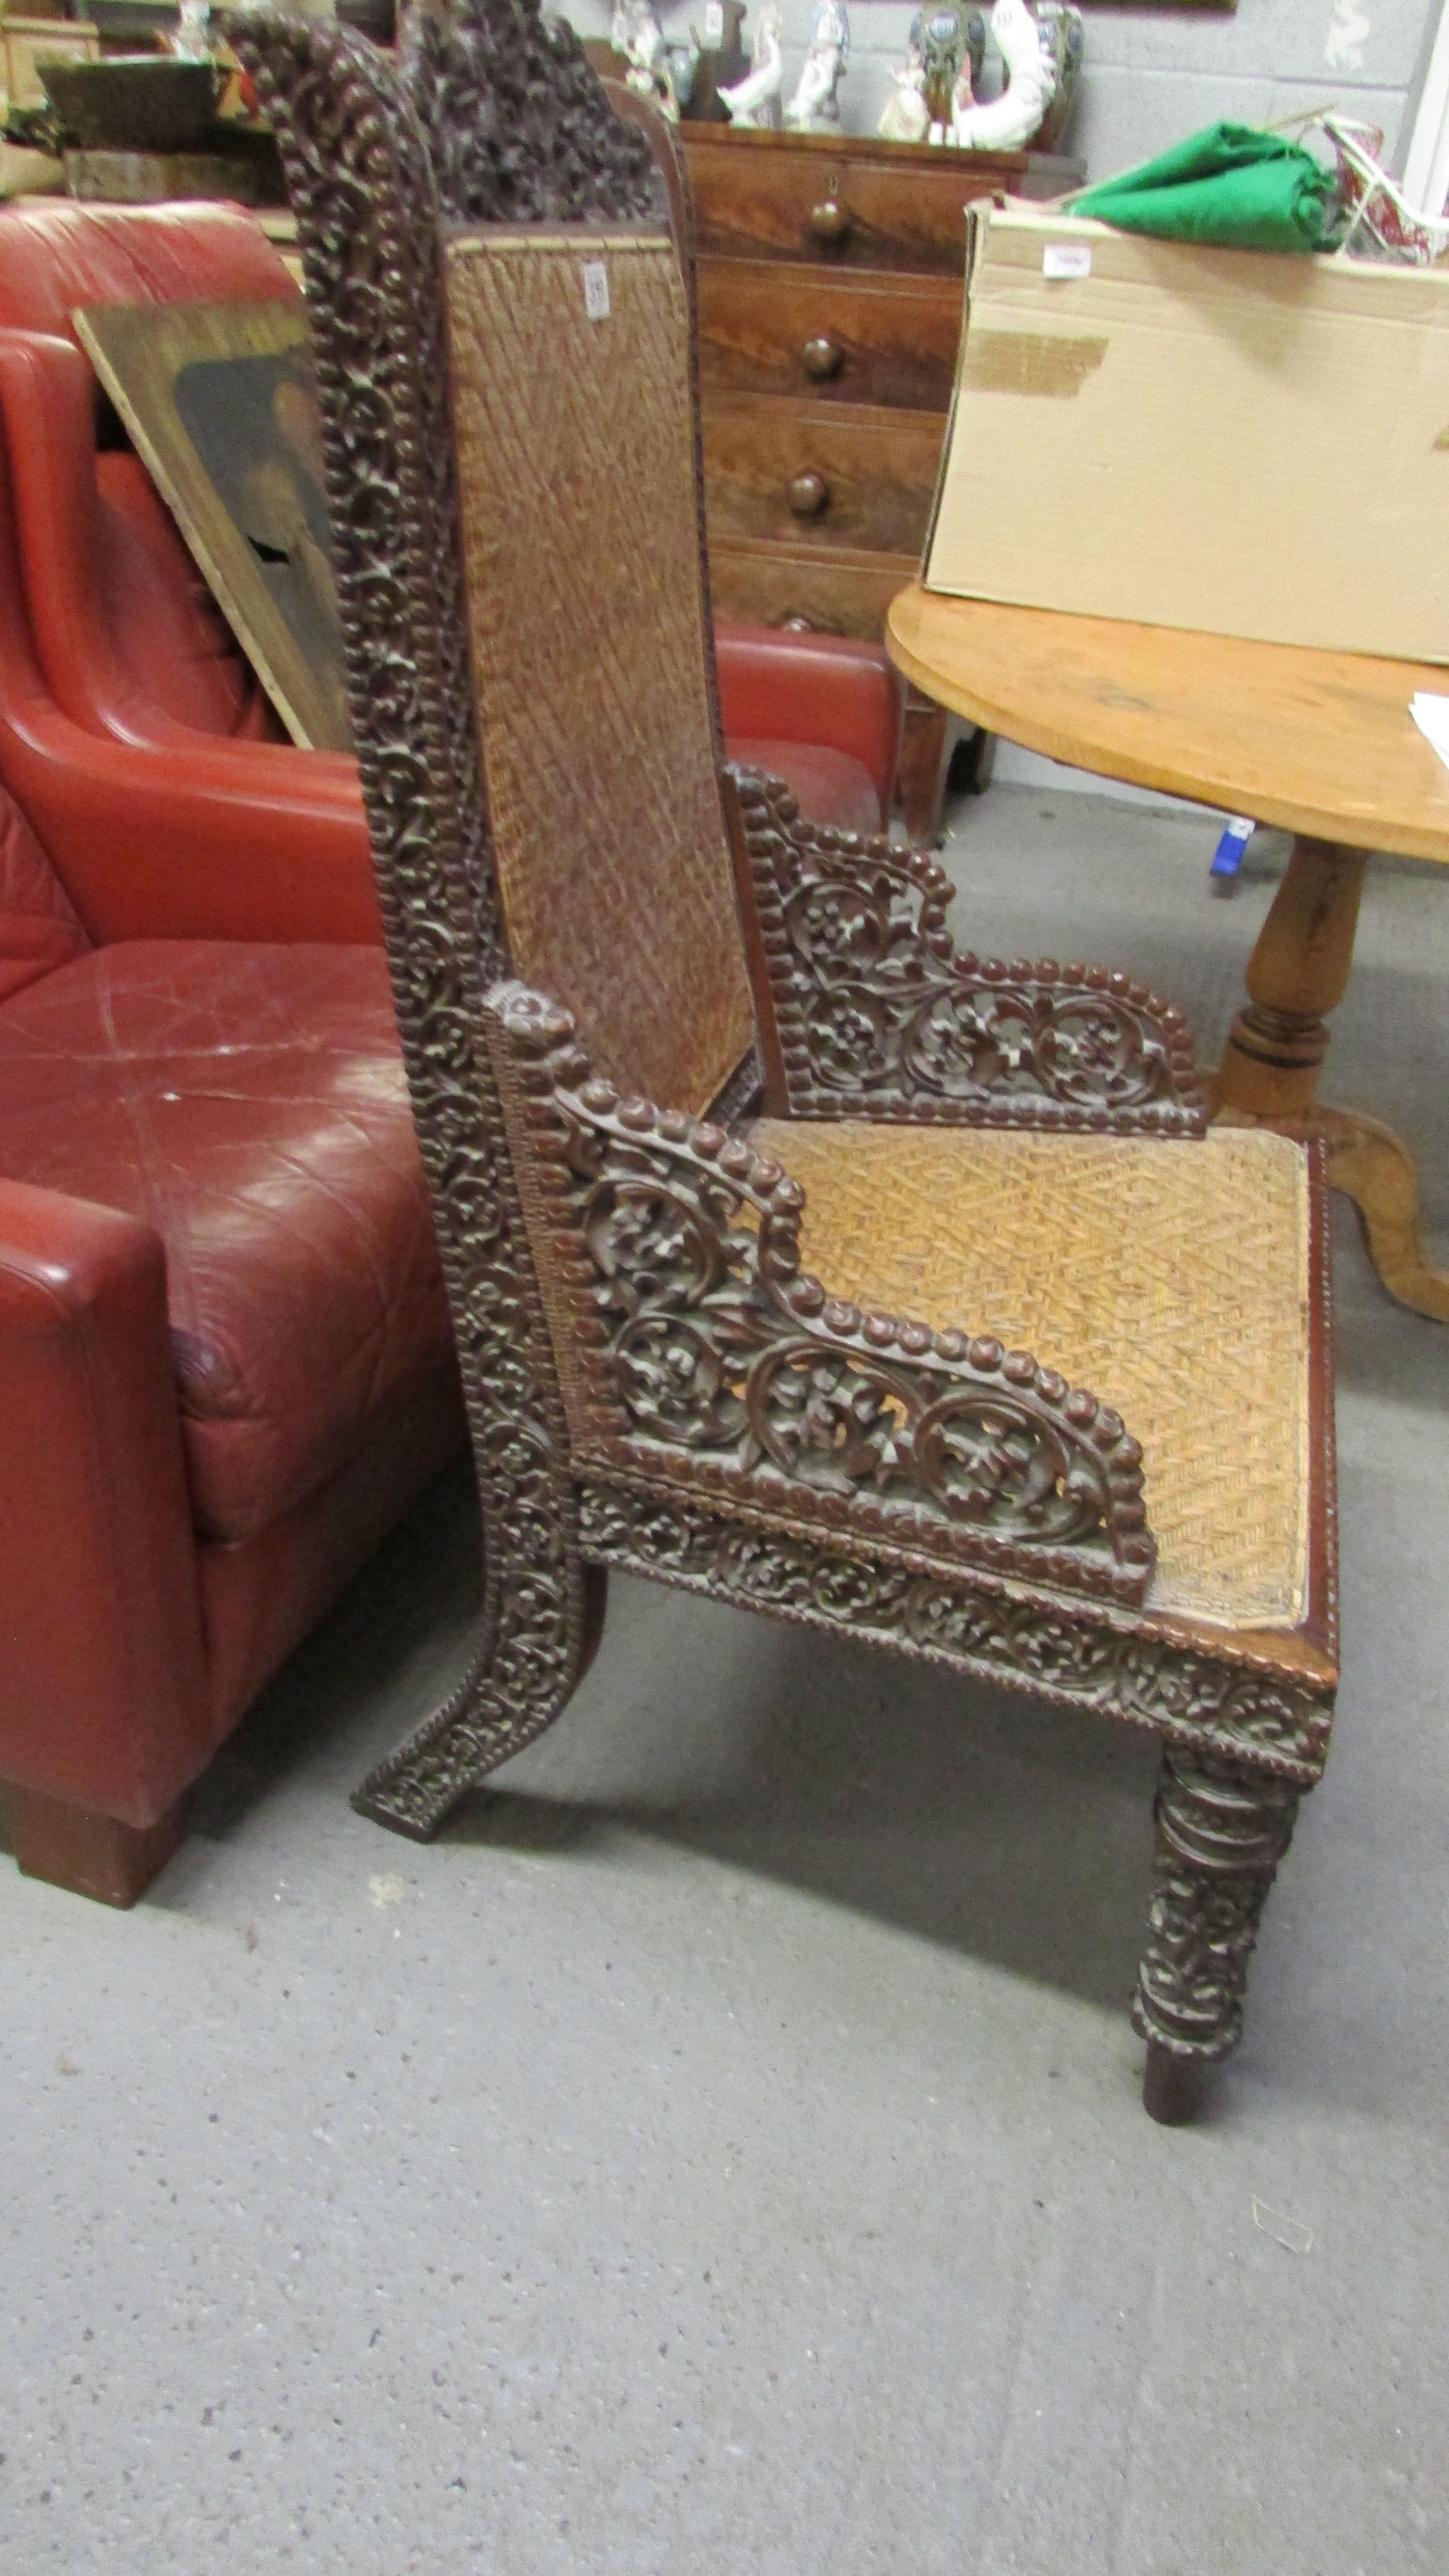 A 19th century Anglo Indian carved hardwood chair with a wicker seat and back - Image 2 of 7